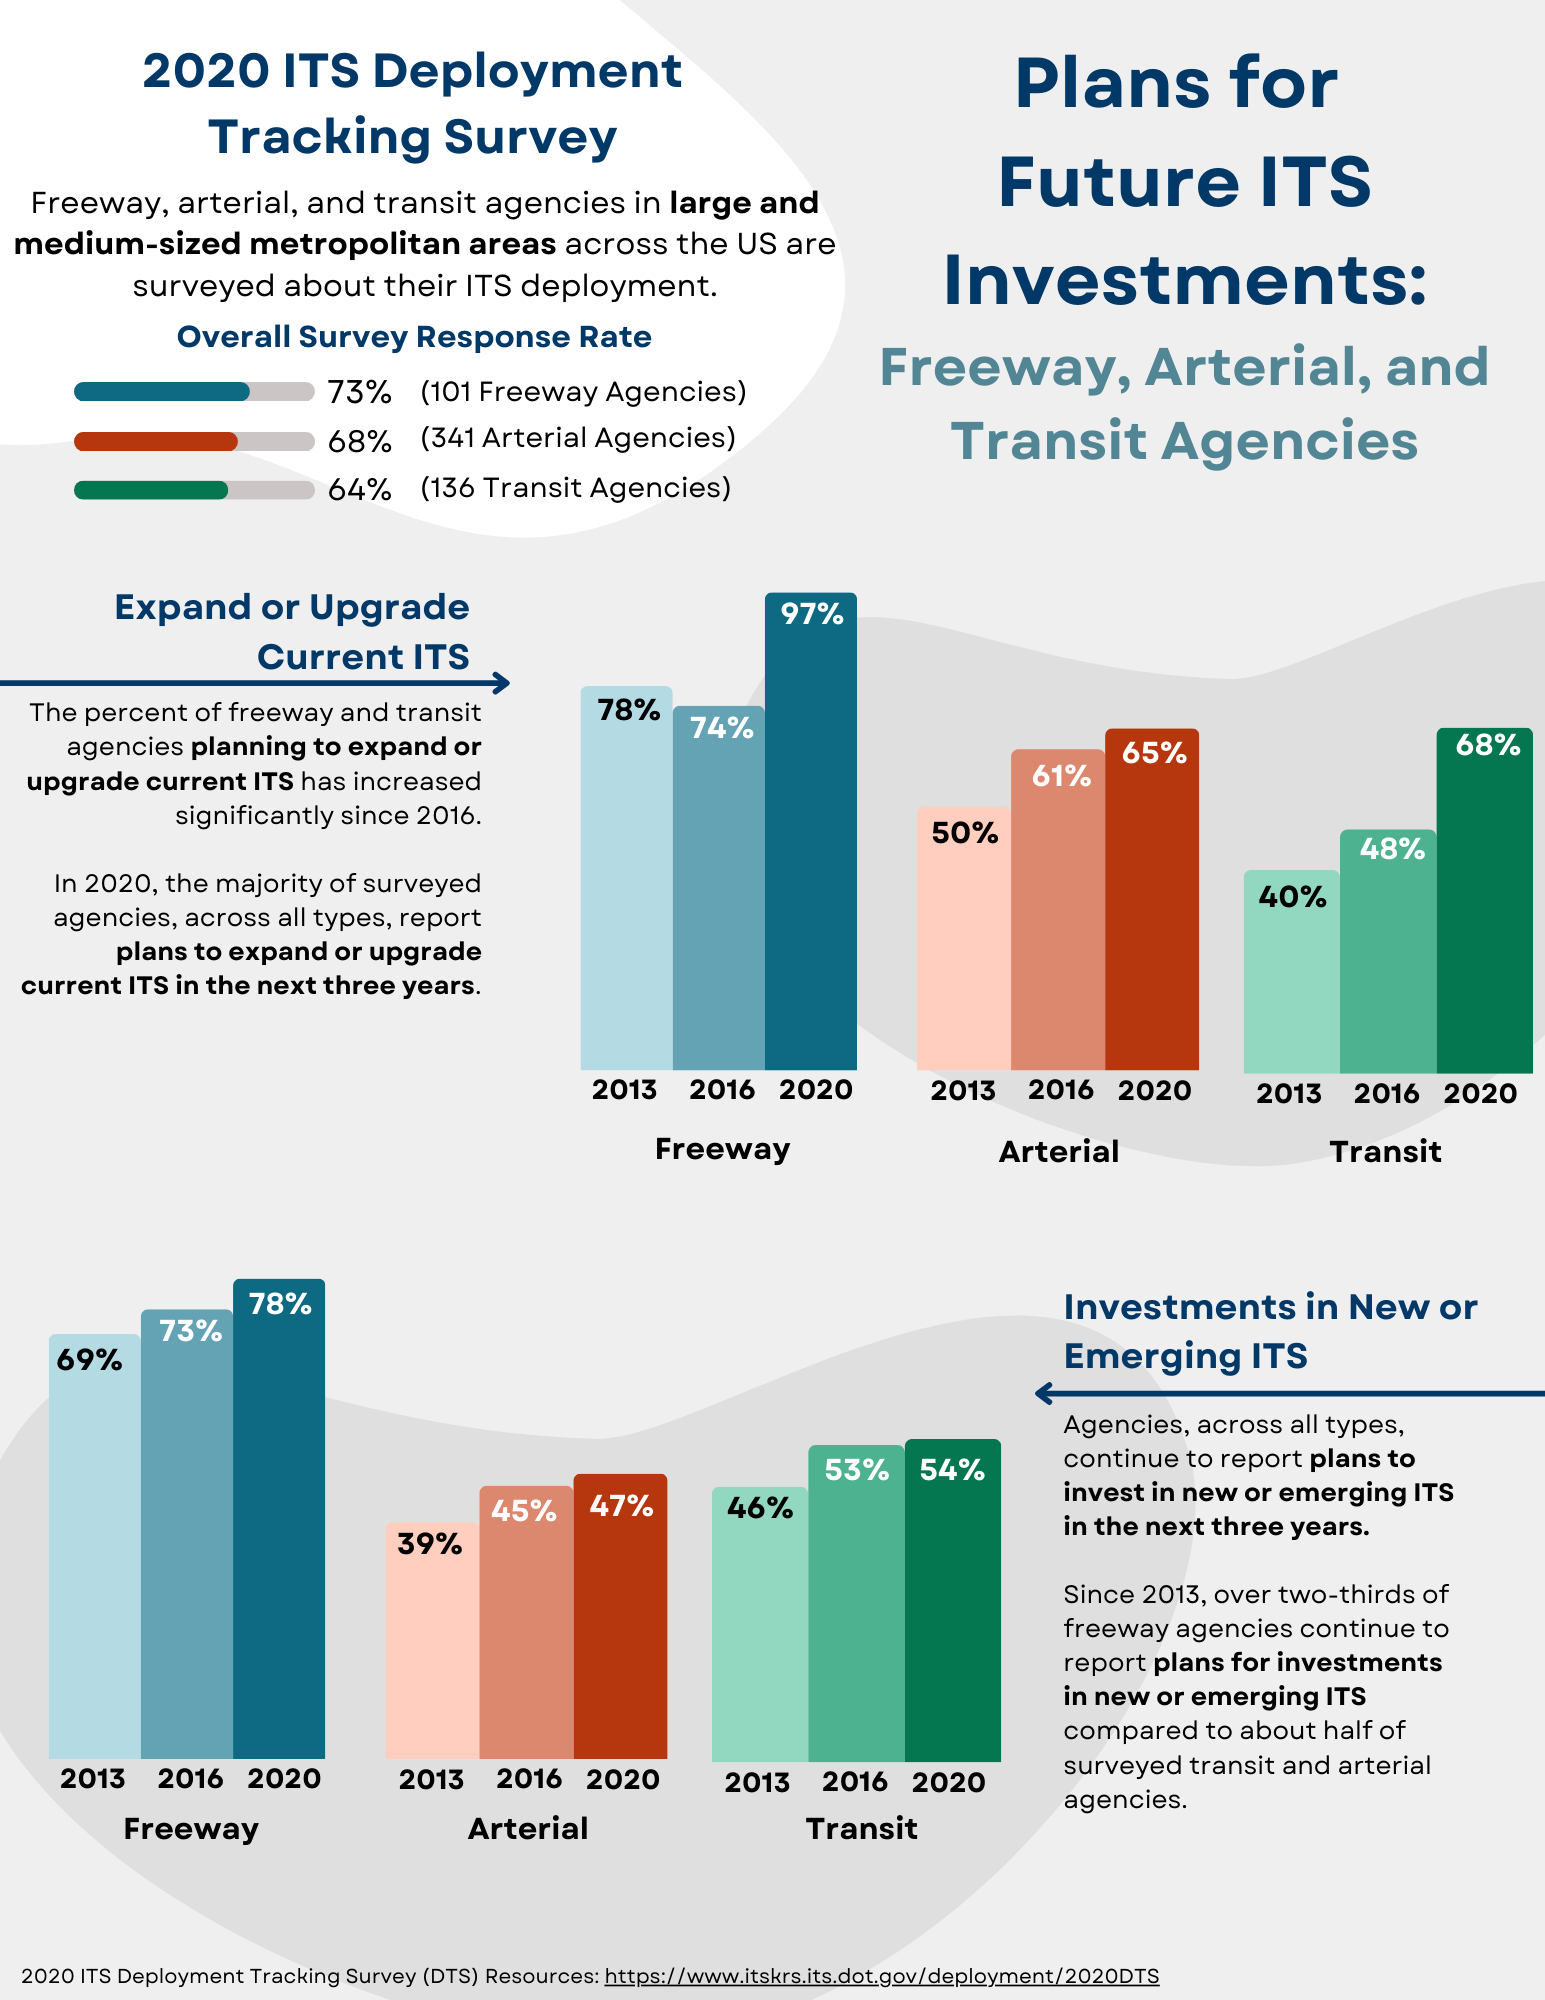 Infographic depicting agencies' plans for future ITS, with 97%, 65% and 68% of freeway, arterial, and transit agencies planning to expand or upgrade current ITS.